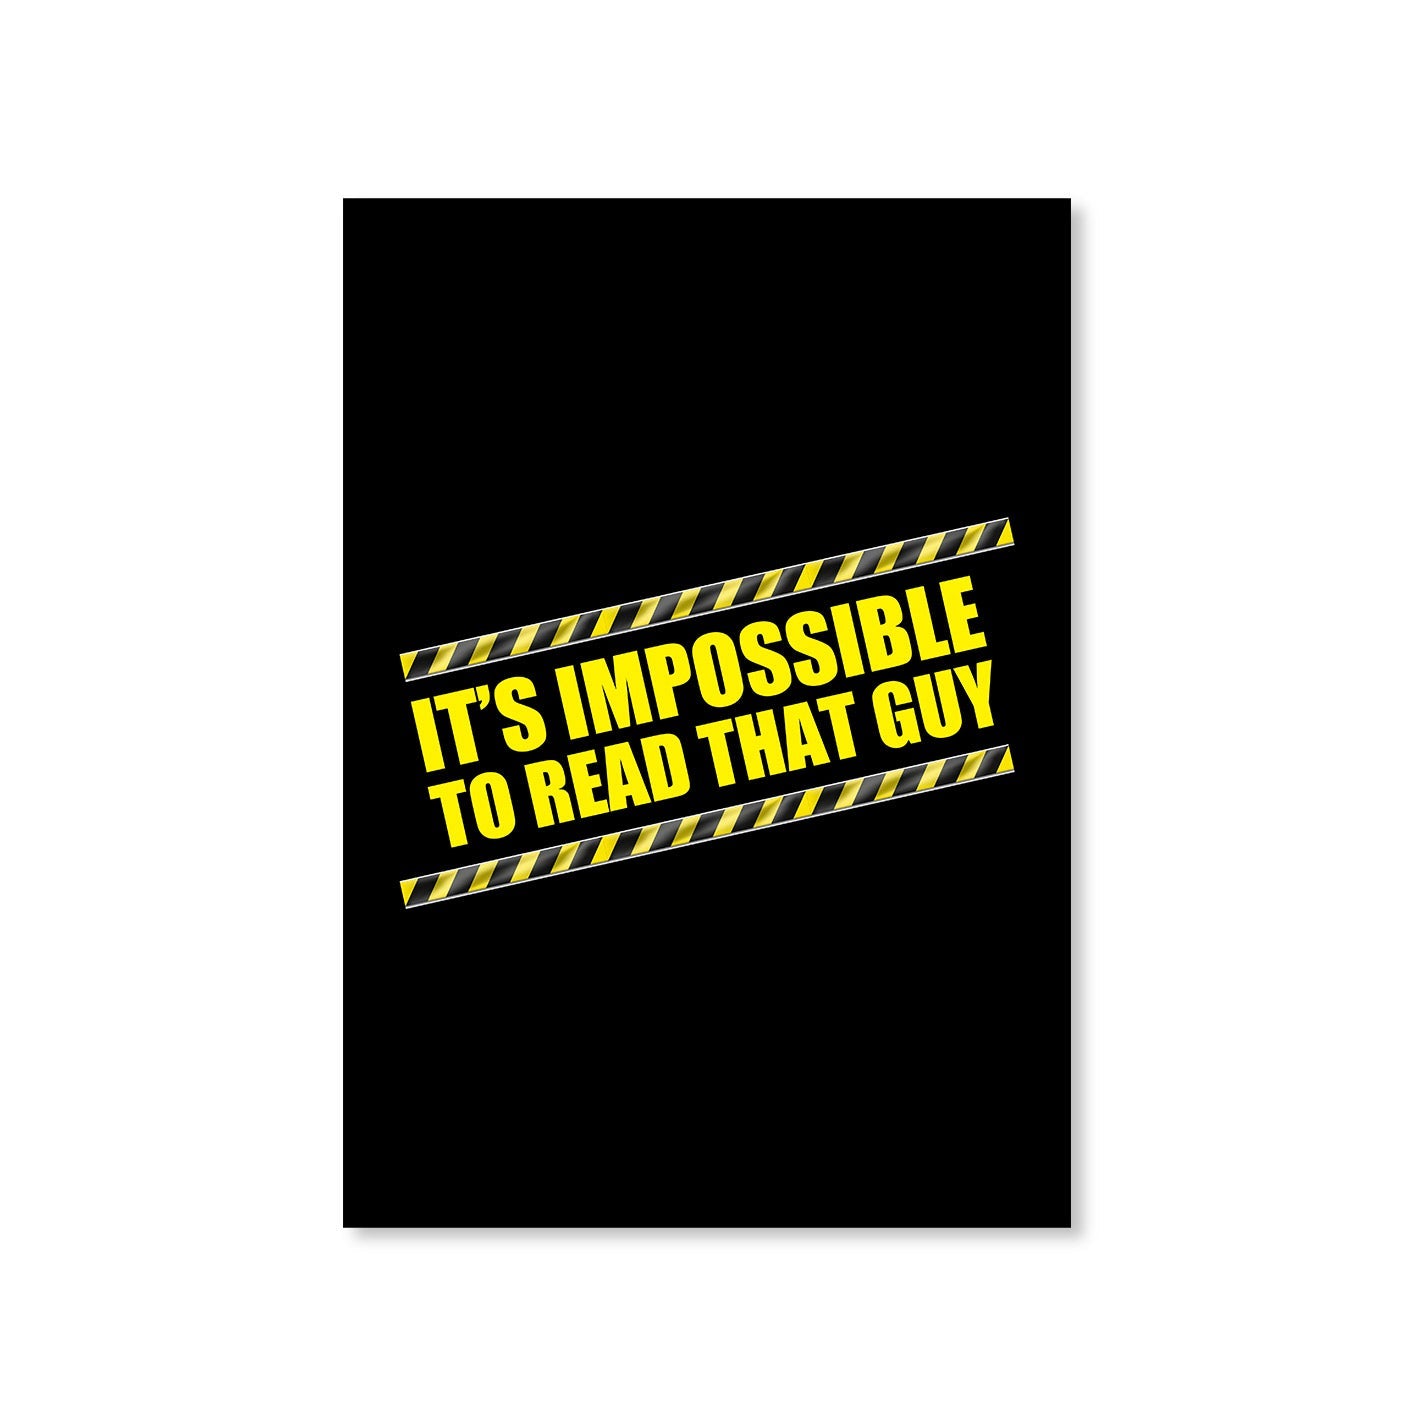 brooklyn nine-nine read that guy poster wall art buy online india the banyan tee tbt a4 quote vector art clothing accessories merchandise